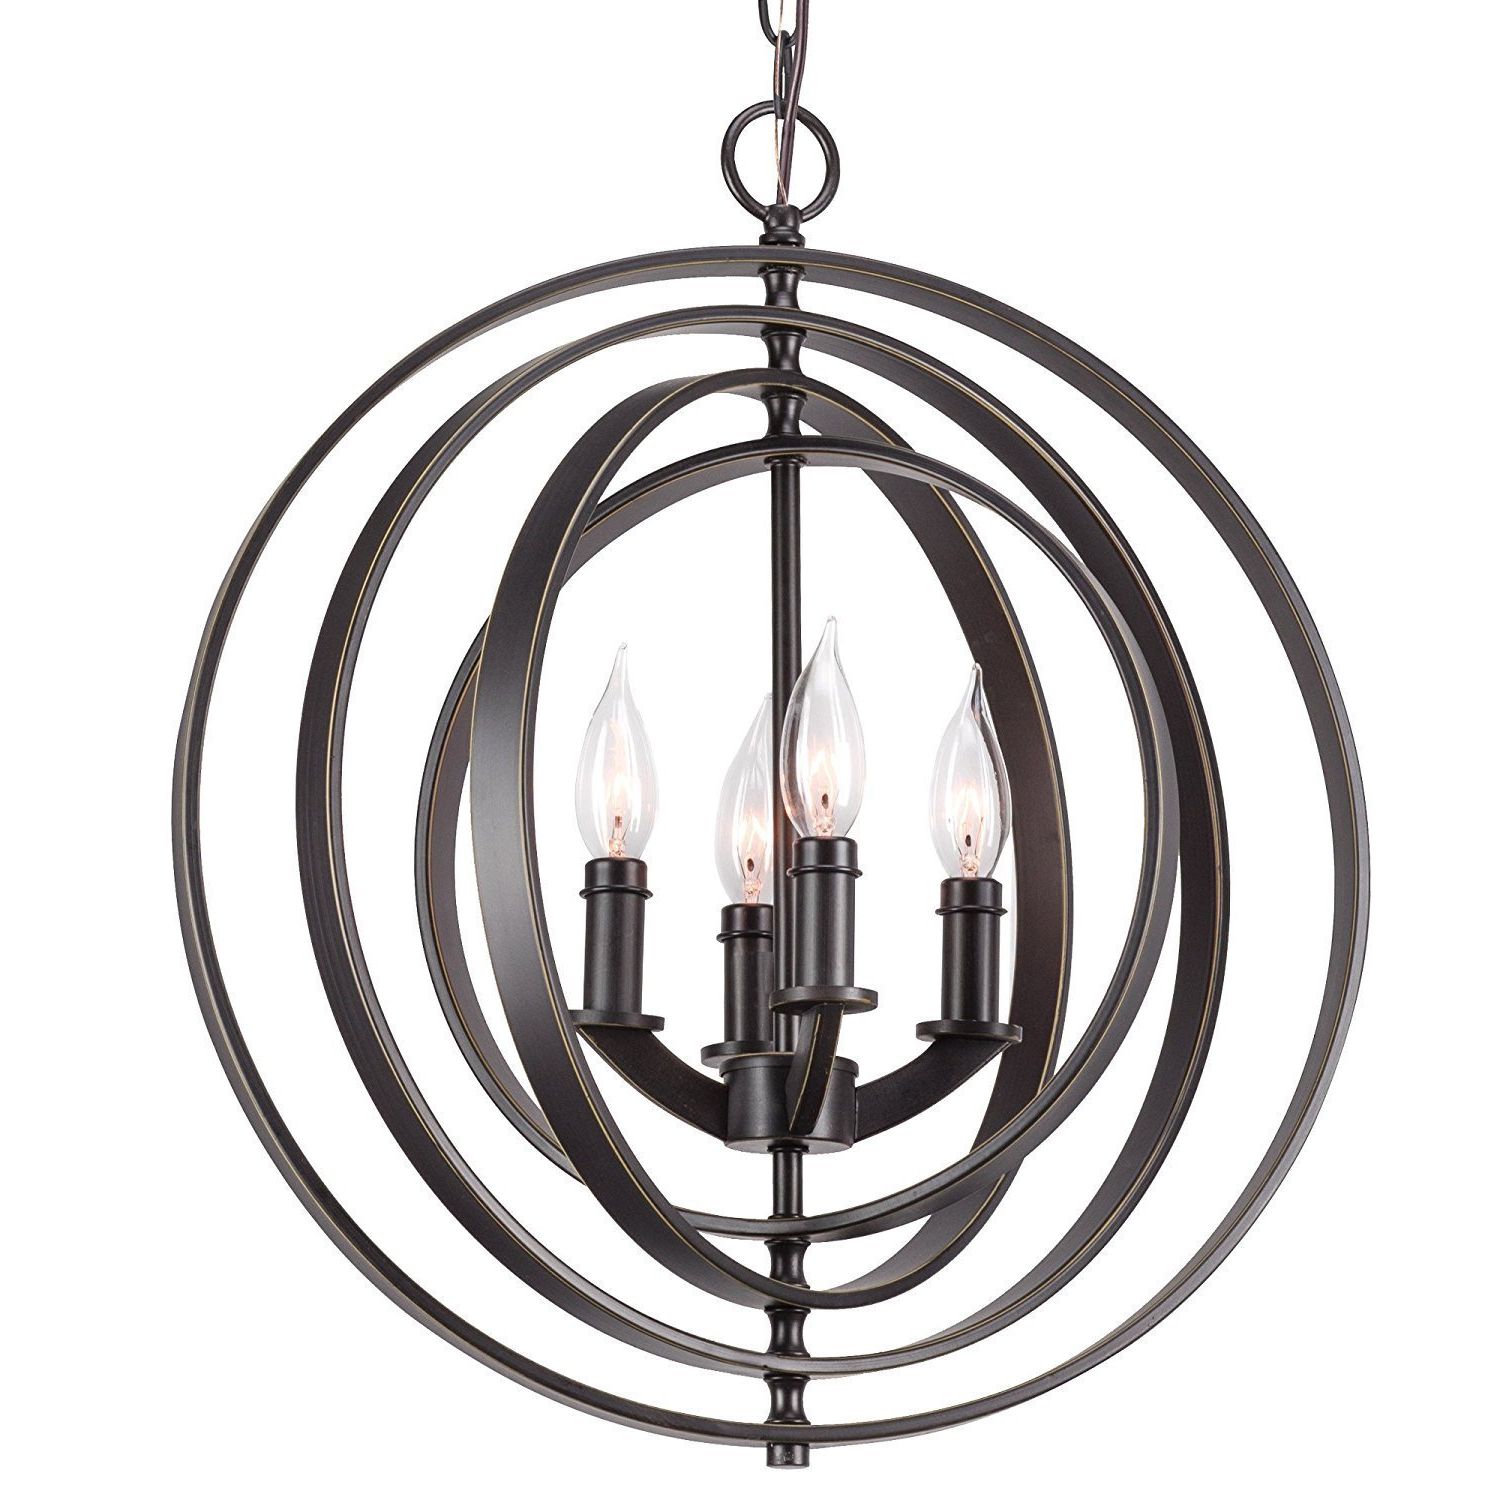 Black Modern Chandeliers Intended For Current 4 Light Modern Sphere/orb Chandelier With Interlocking (View 7 of 15)